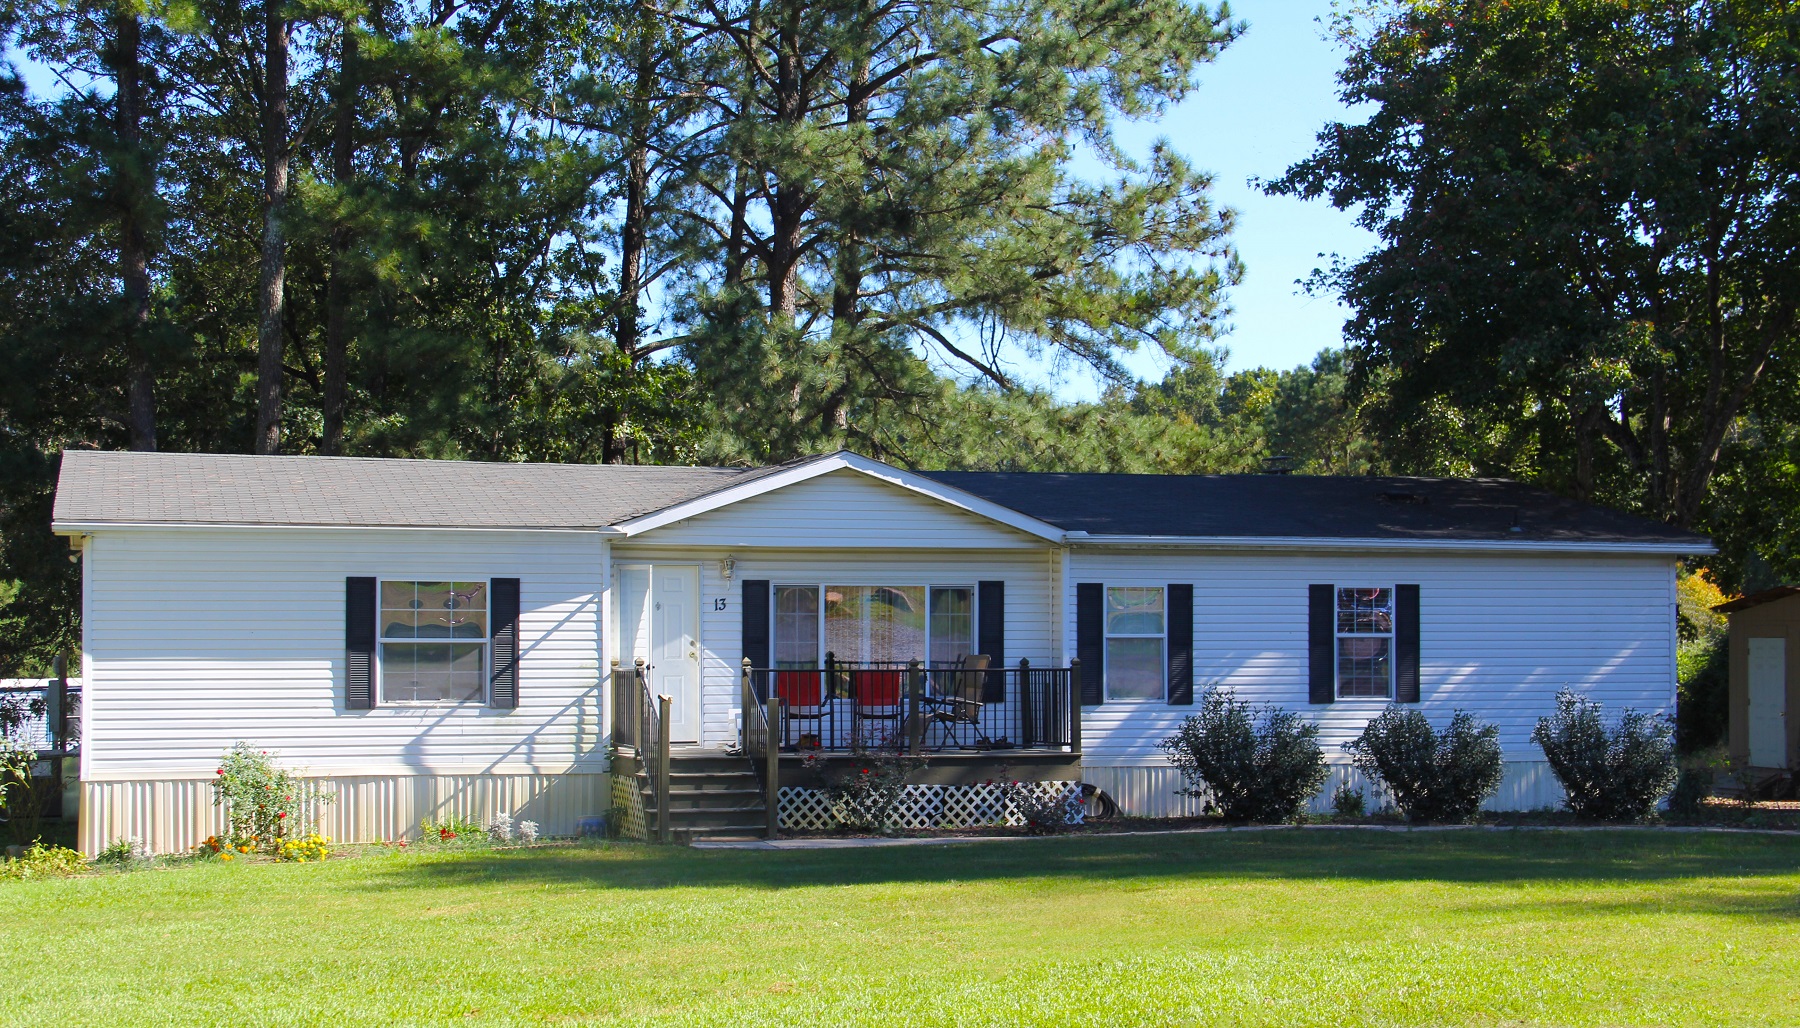 Manufactured Housing Properties Refinances 42 Communities with Fannie Mae and Expands North Carolina Portfolio